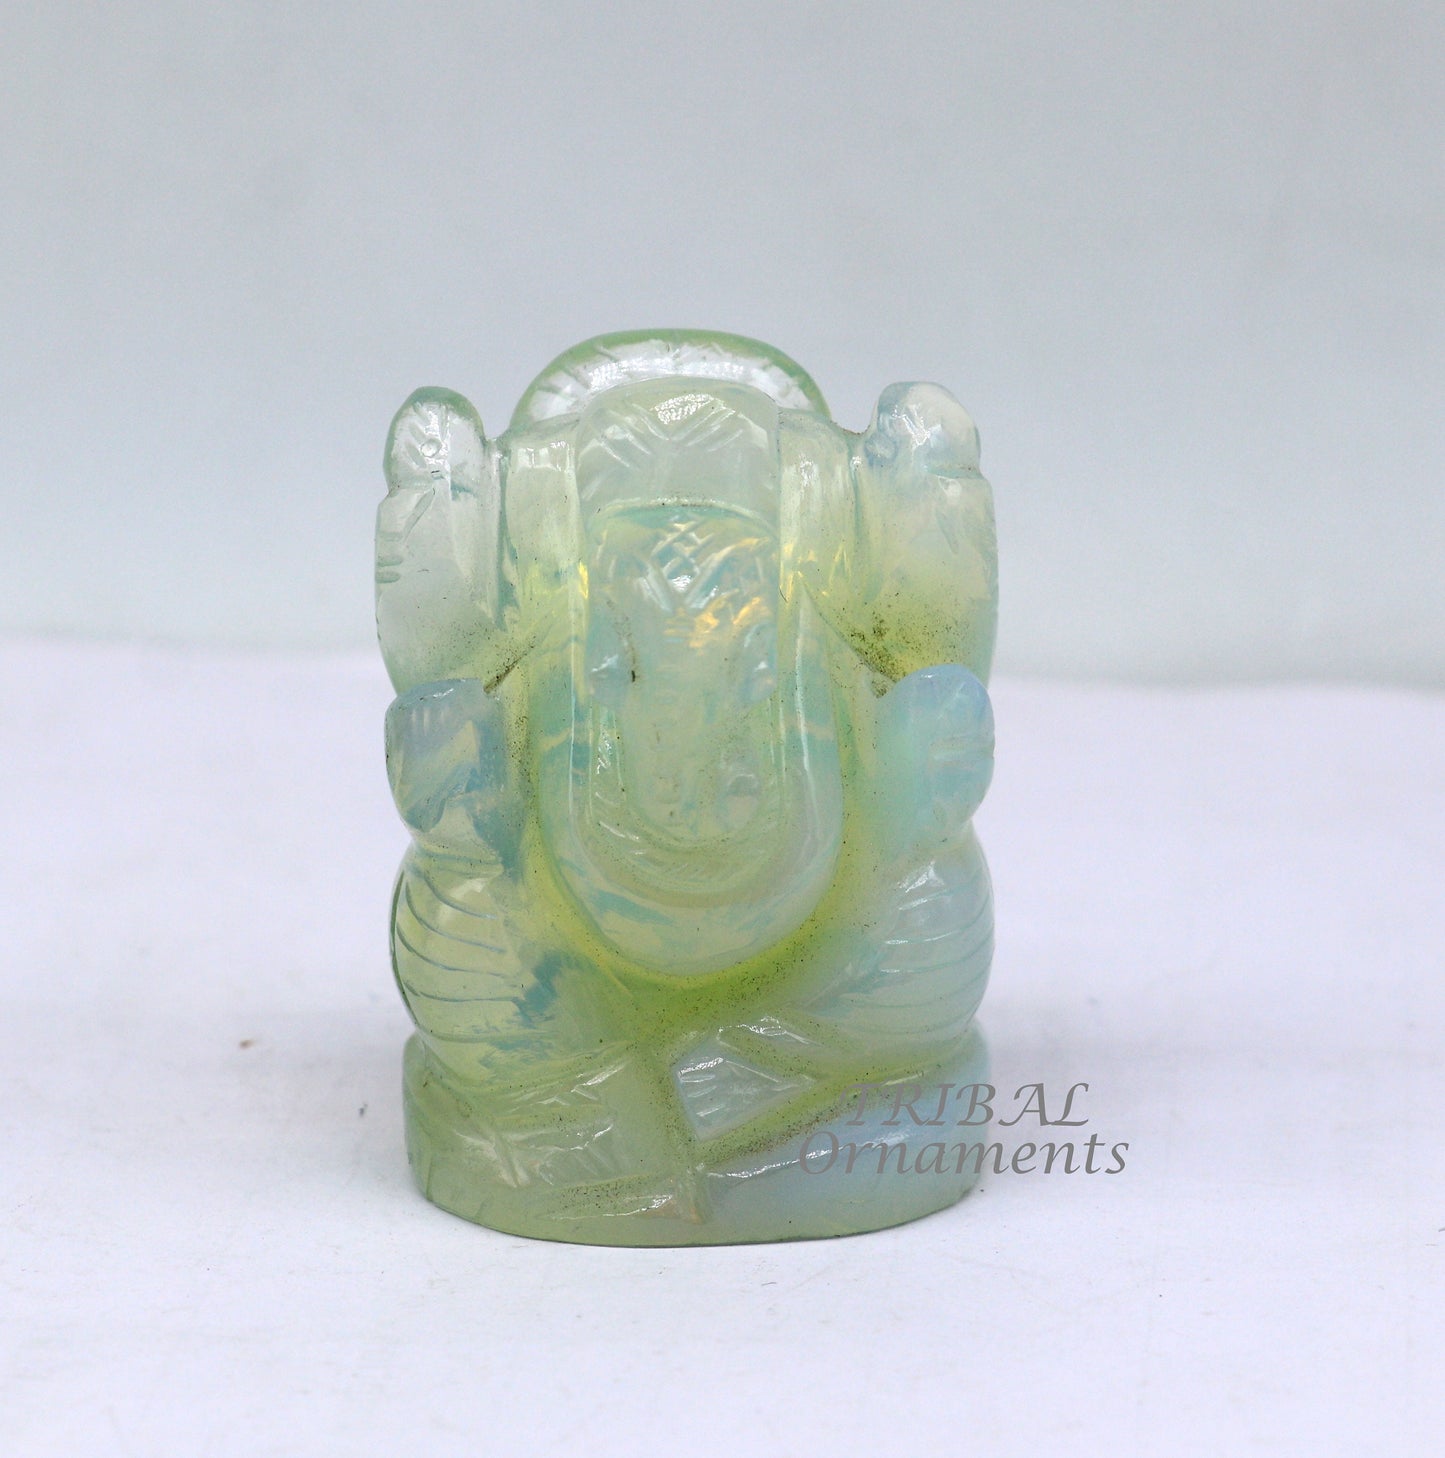 Divine lord Ganesha statue figurine, amazing moon stone style resin statue sculpture, best puja temple art for wealth prosperity stna06 - TRIBAL ORNAMENTS